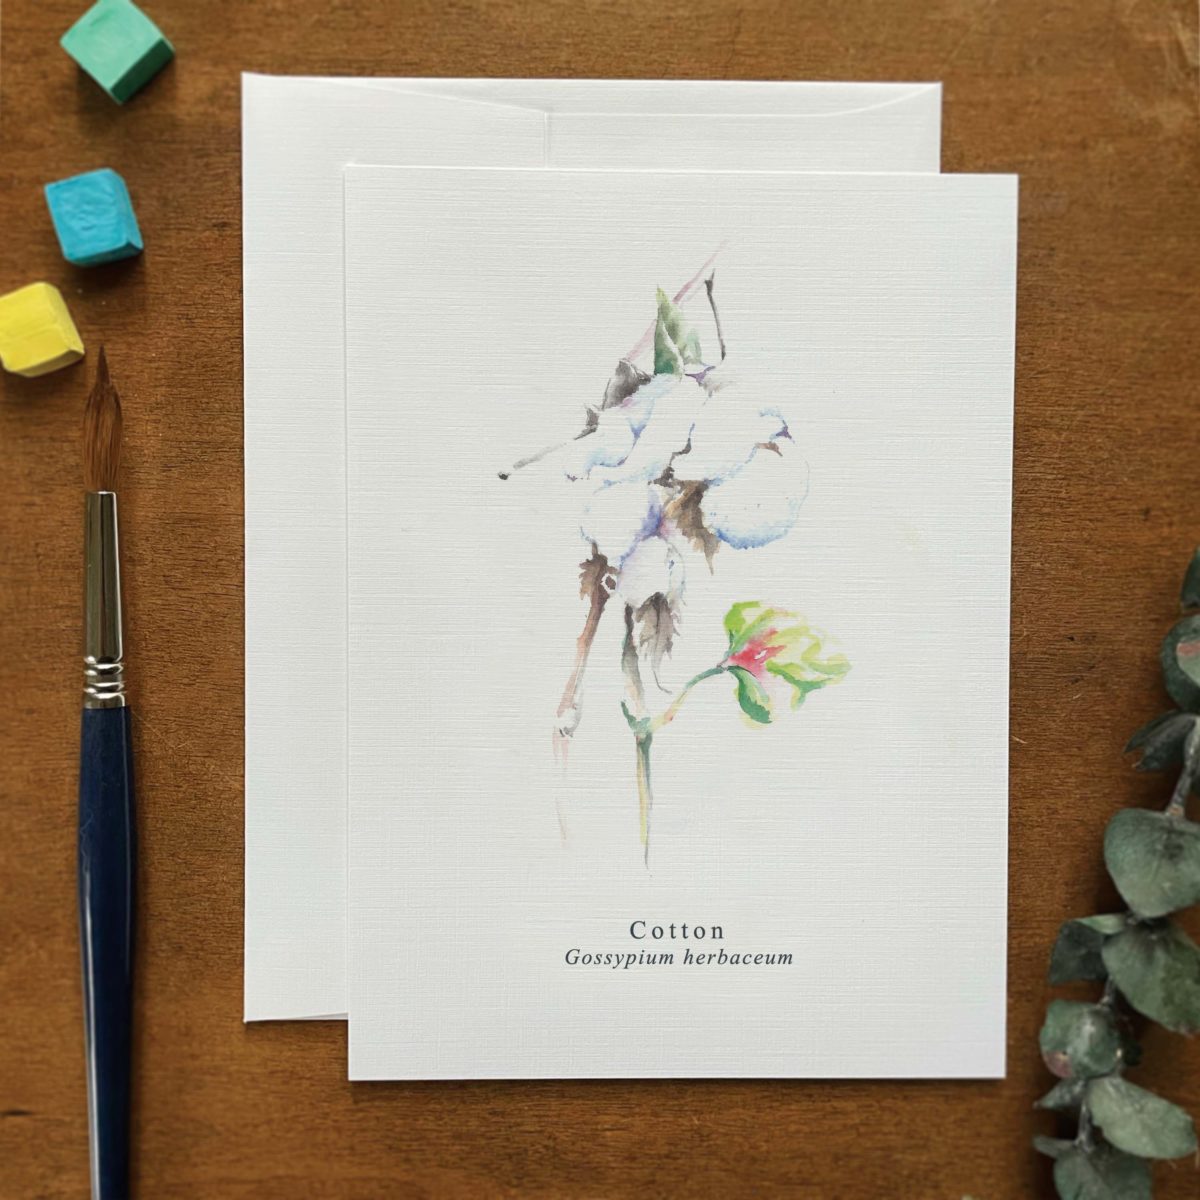 A2 greeting card of a Cotton plant